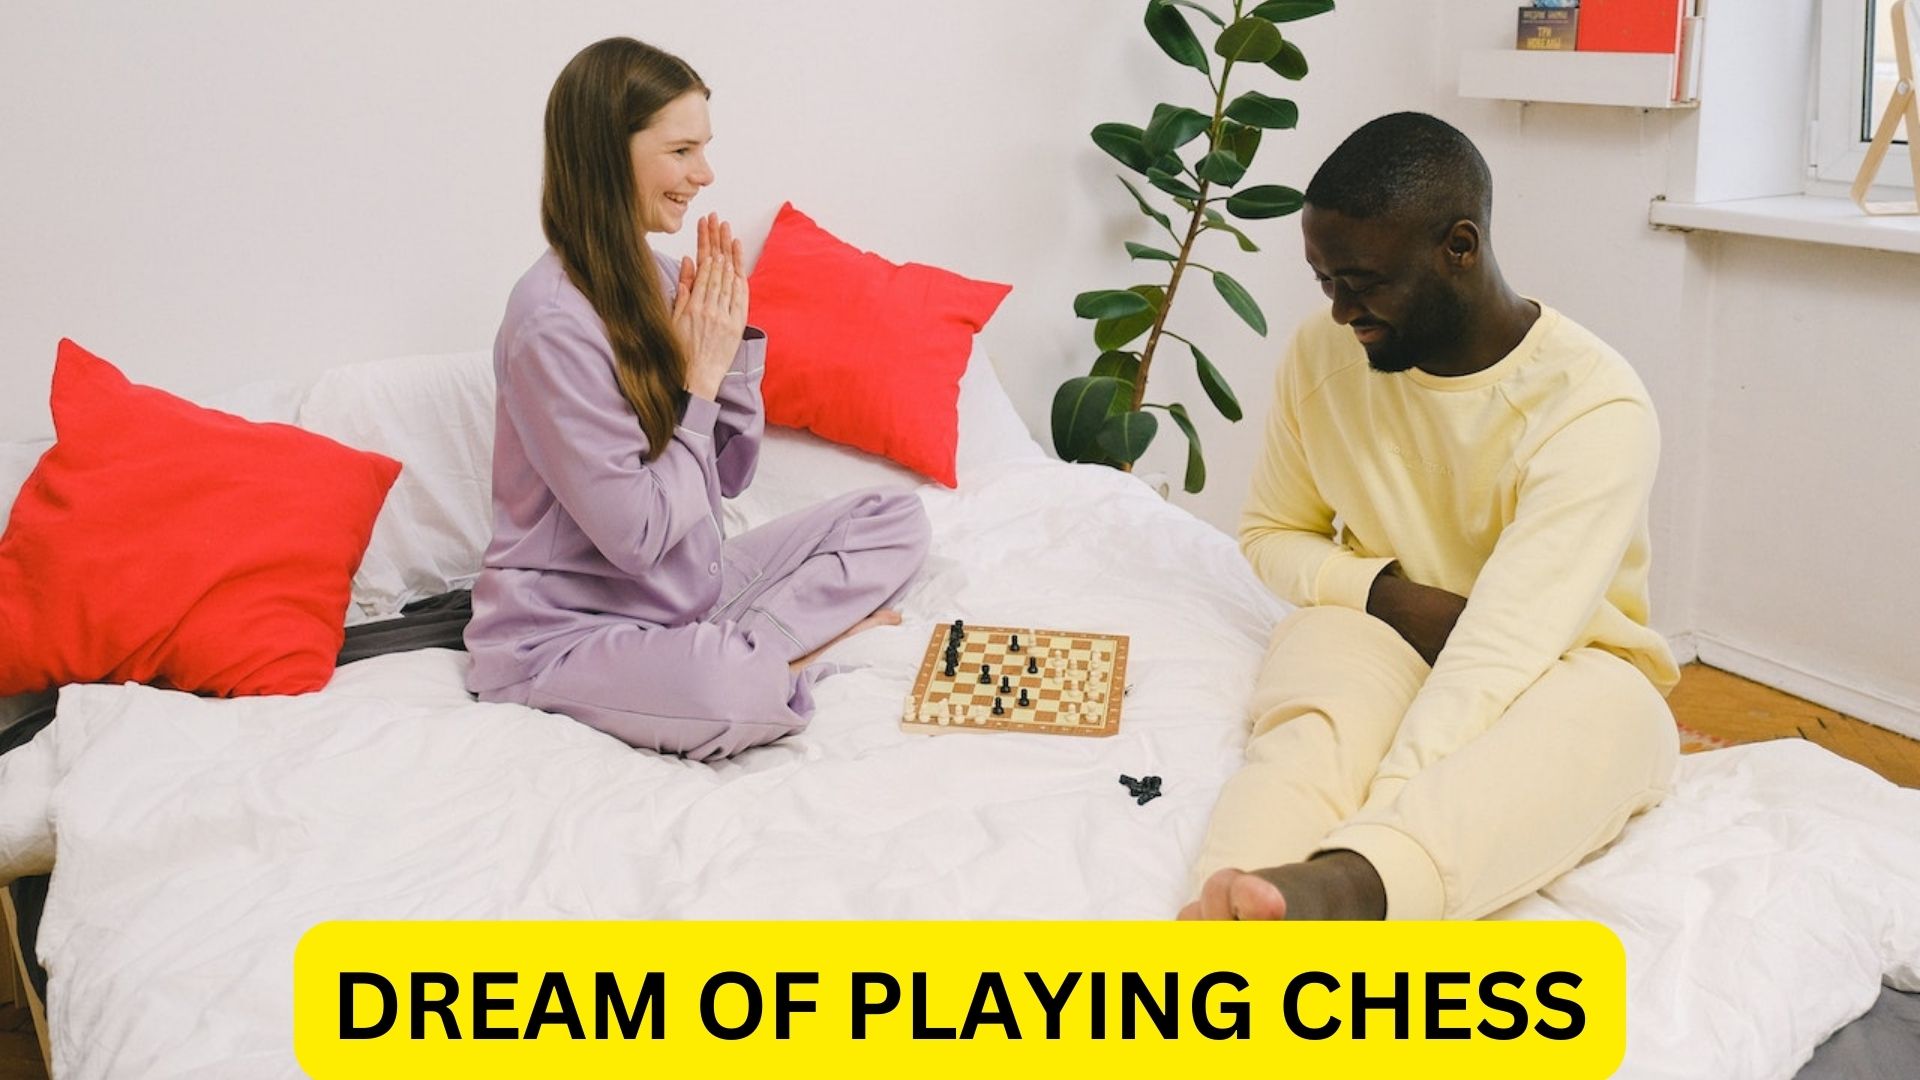 Dream Of Playing Chess - Symbolizes You Being In A State Of Conflict